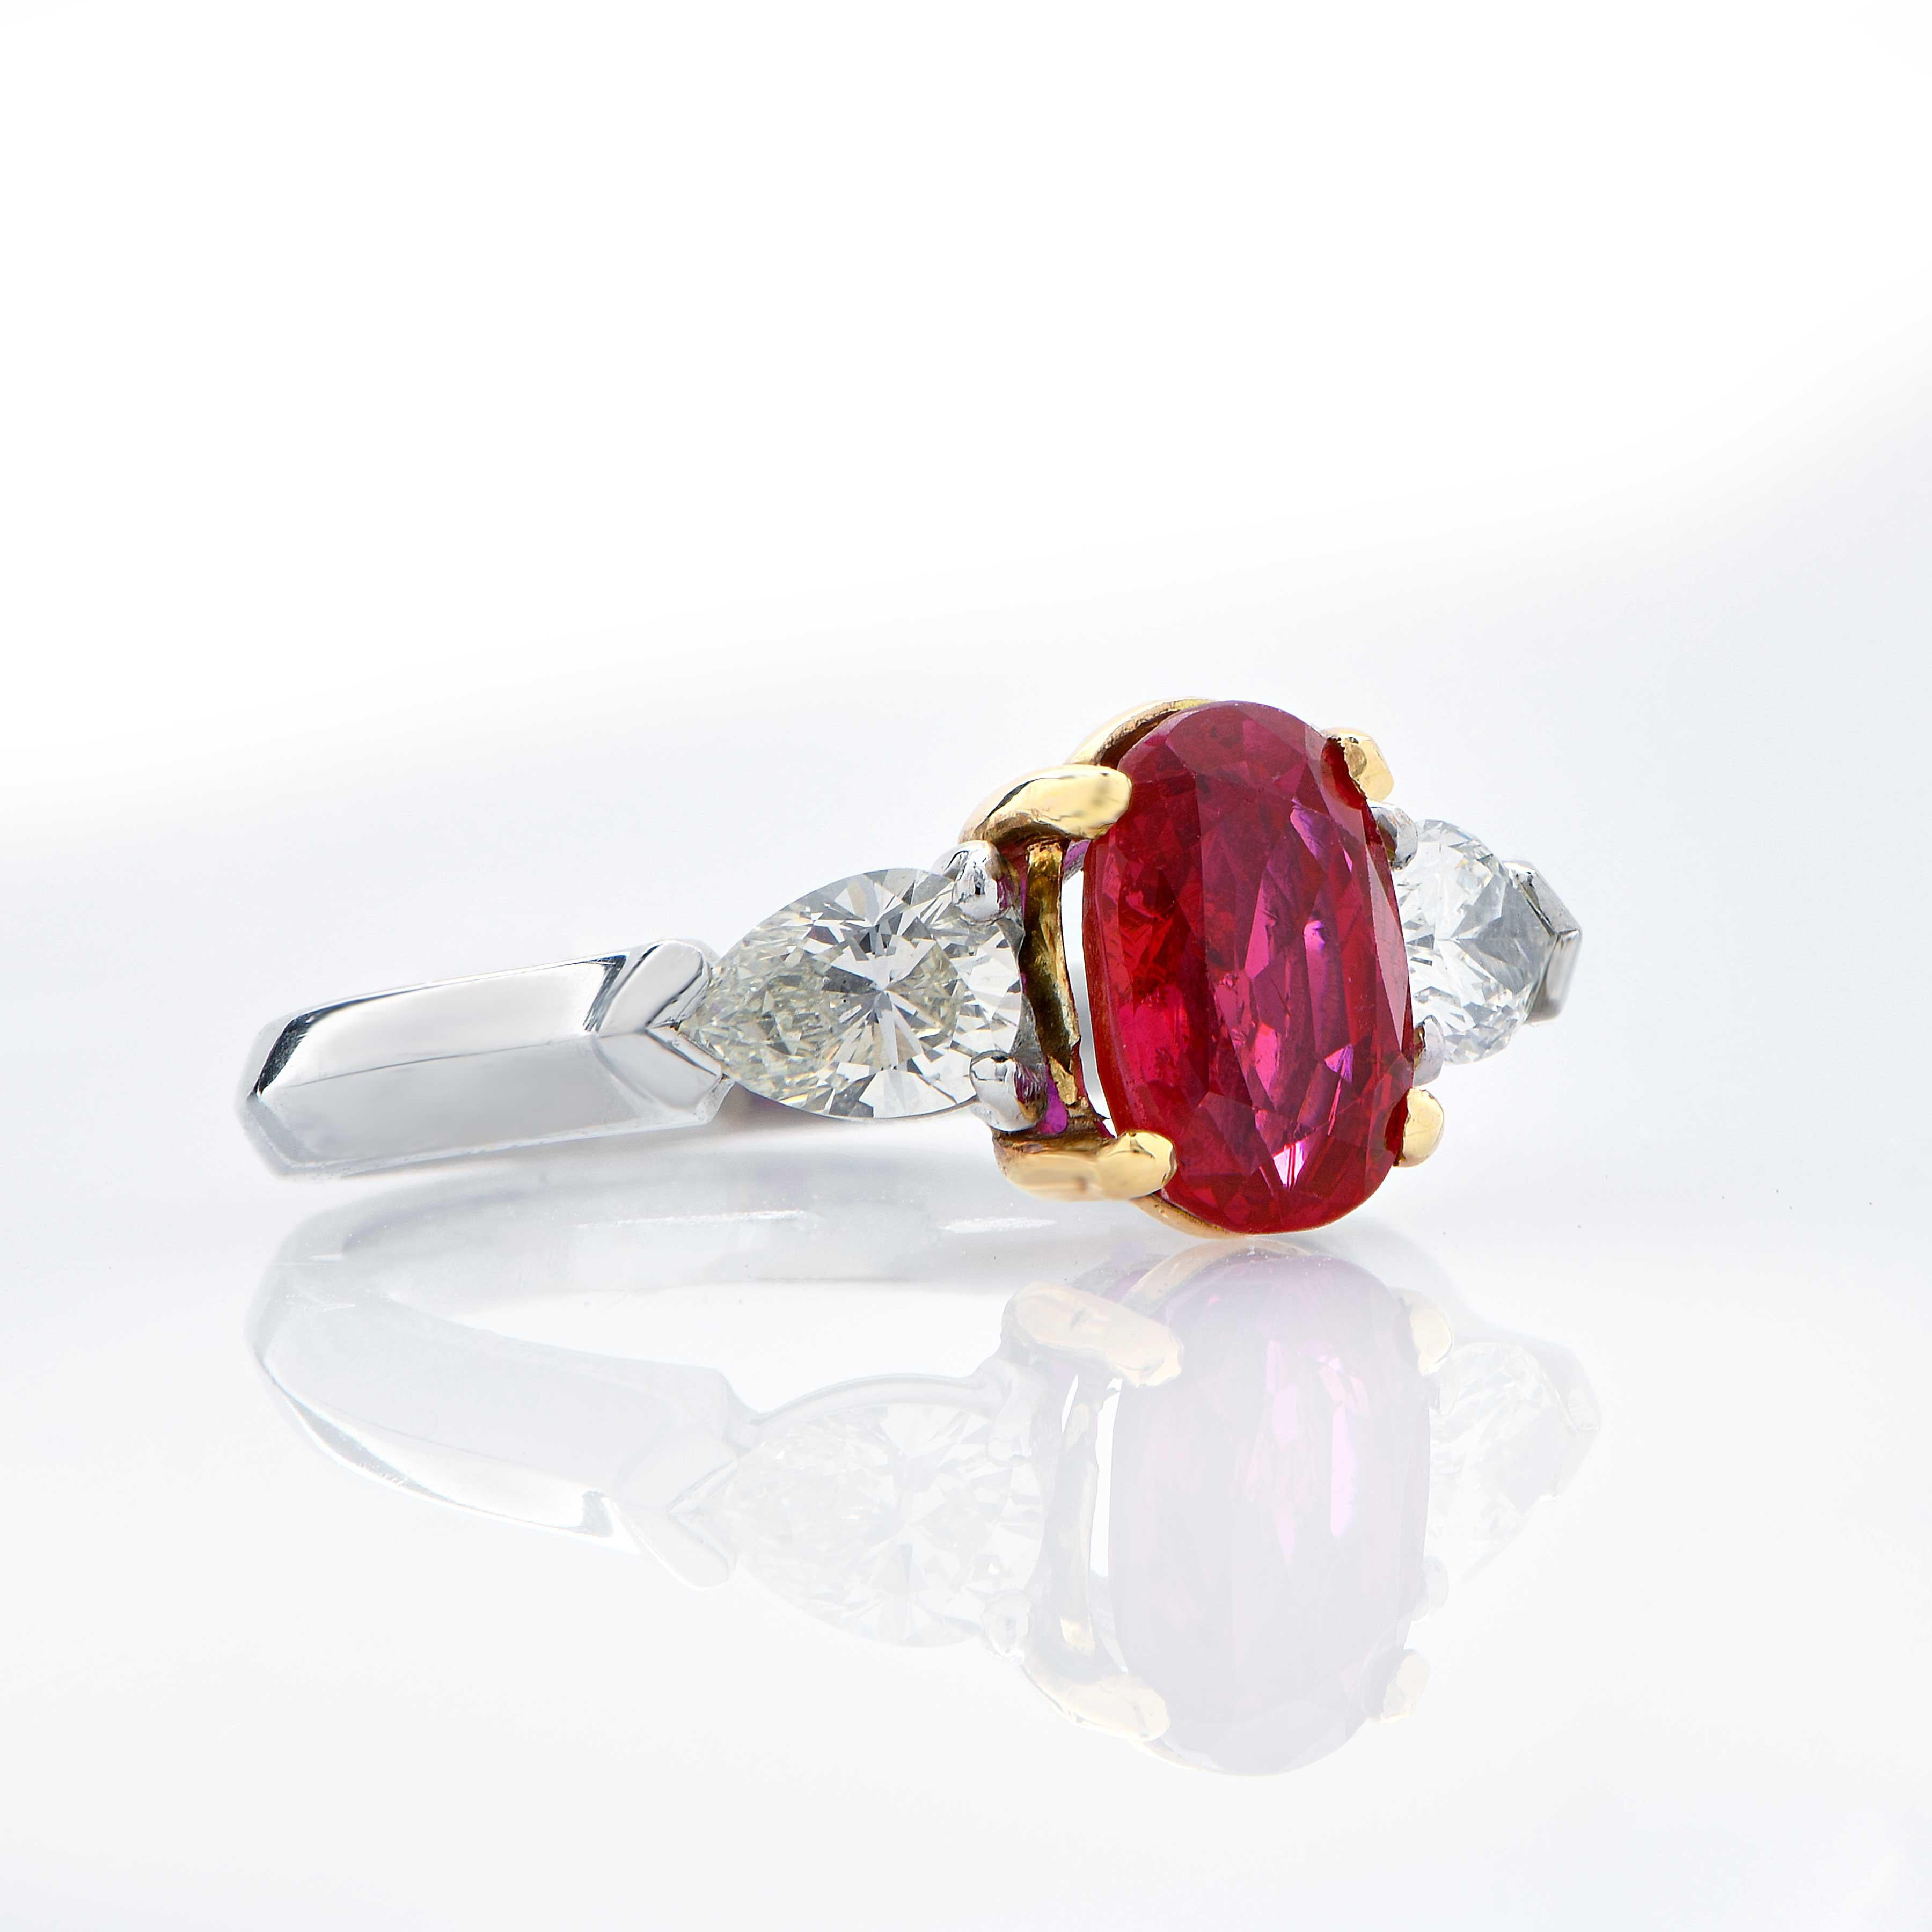 1.24 Carat Burma Ruby and Diamond Platinum and 18 Karat Yellow Gold Ring In Excellent Condition For Sale In Bay Harbor Islands, FL